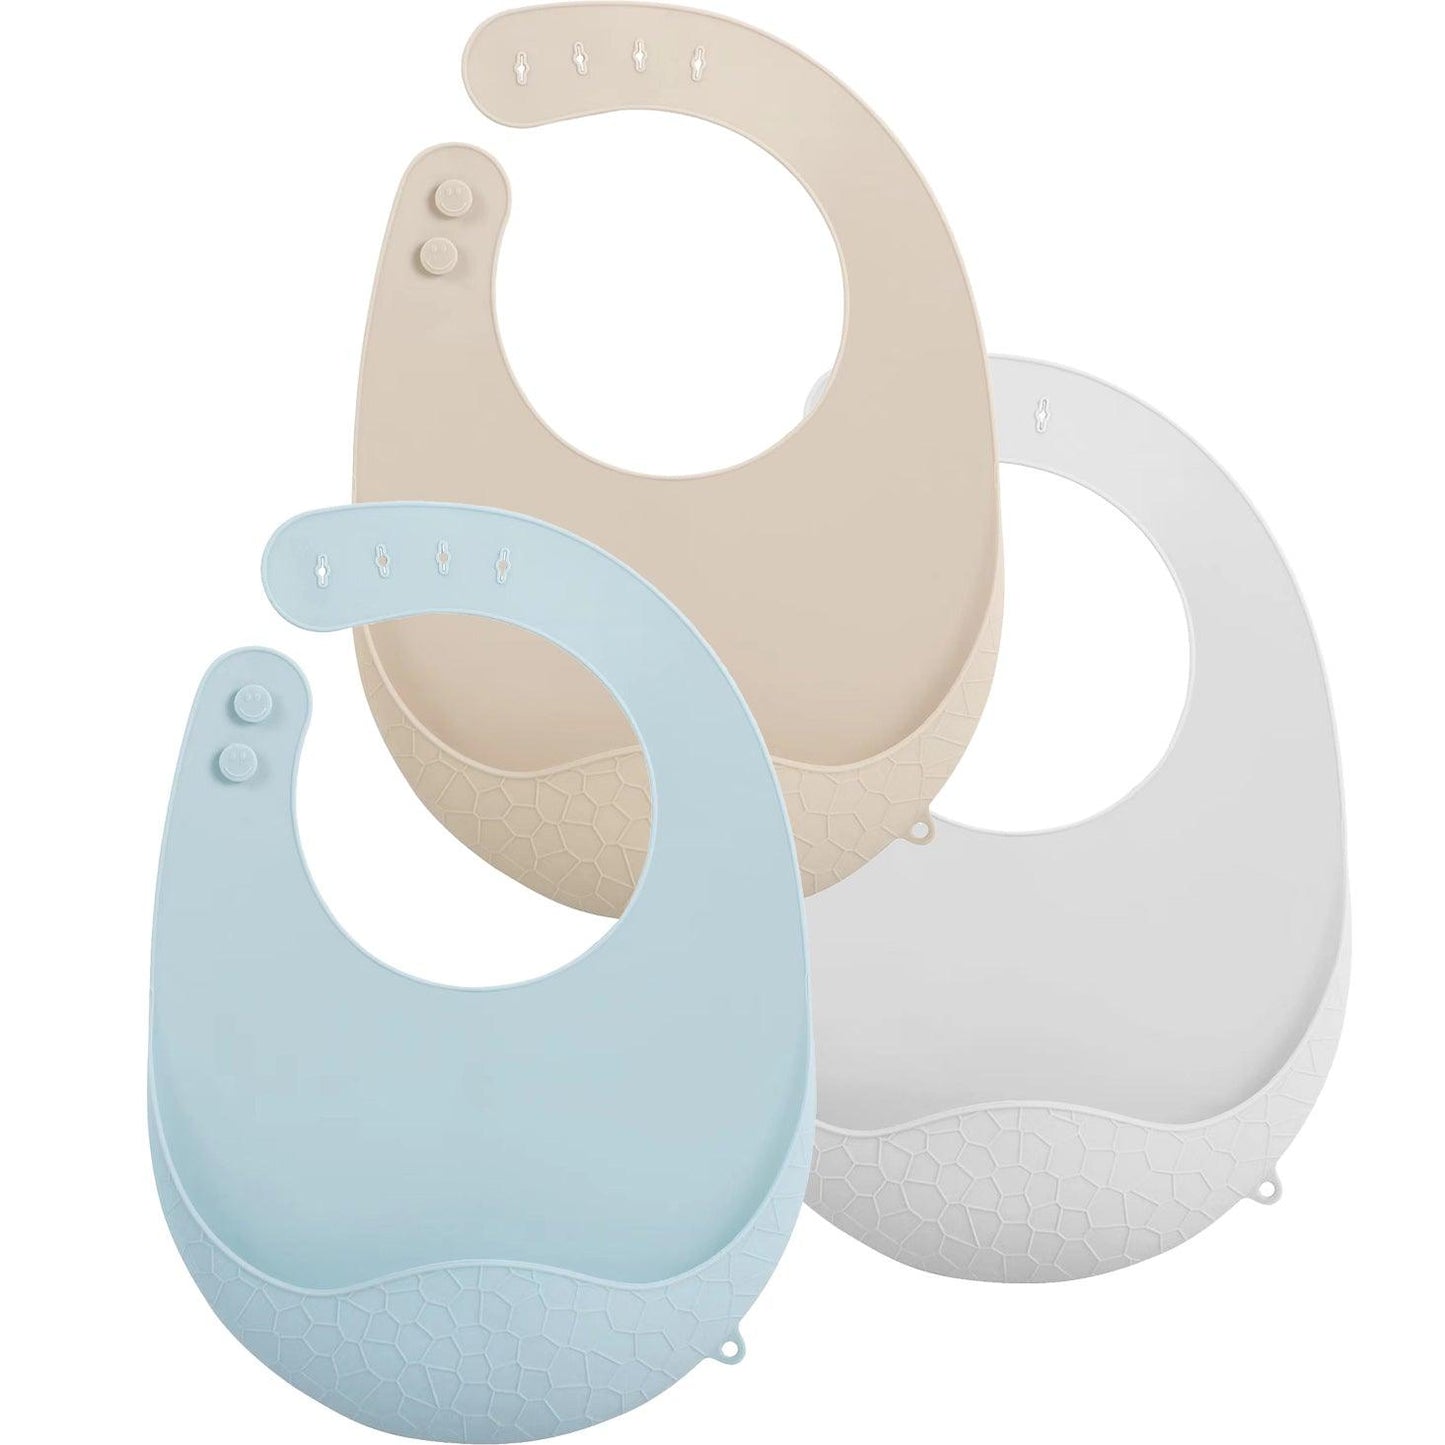 Super Light Silicone Baby Bibs - PandaEar